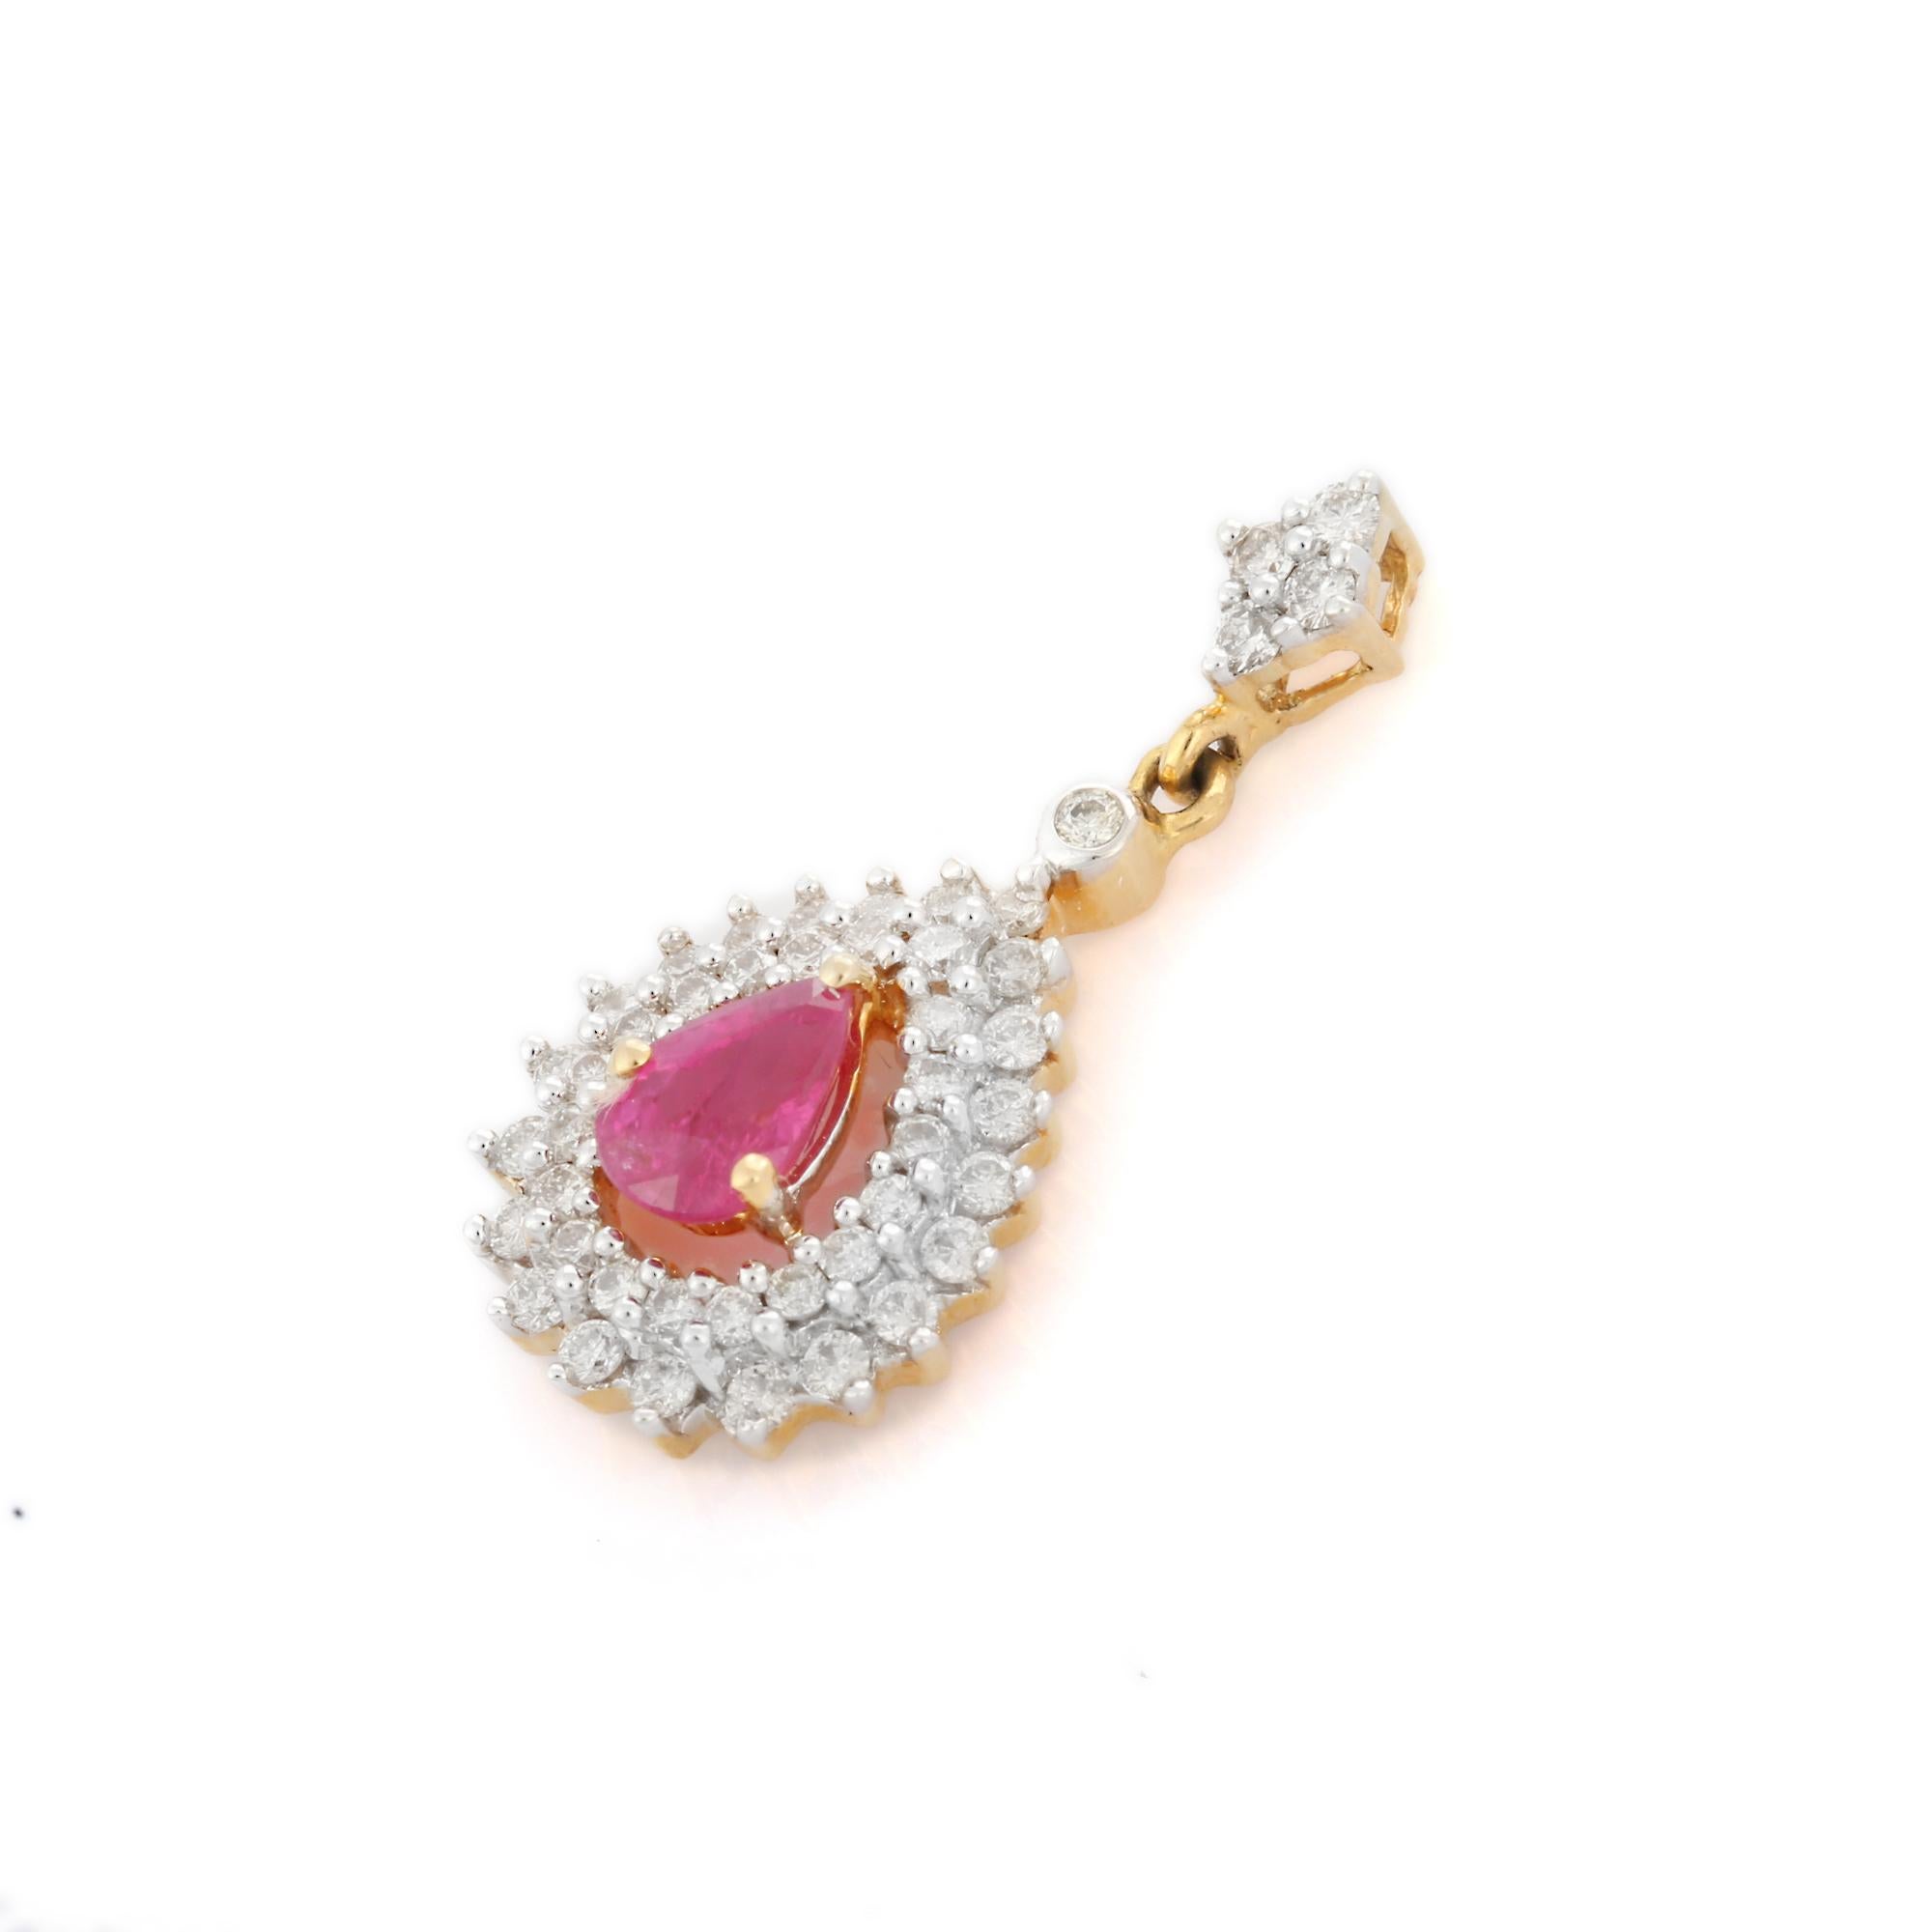 Contemporary Halo Diamond Ruby Dangling Wedding Pendant Studded in 18K Yellow Gold For Sale